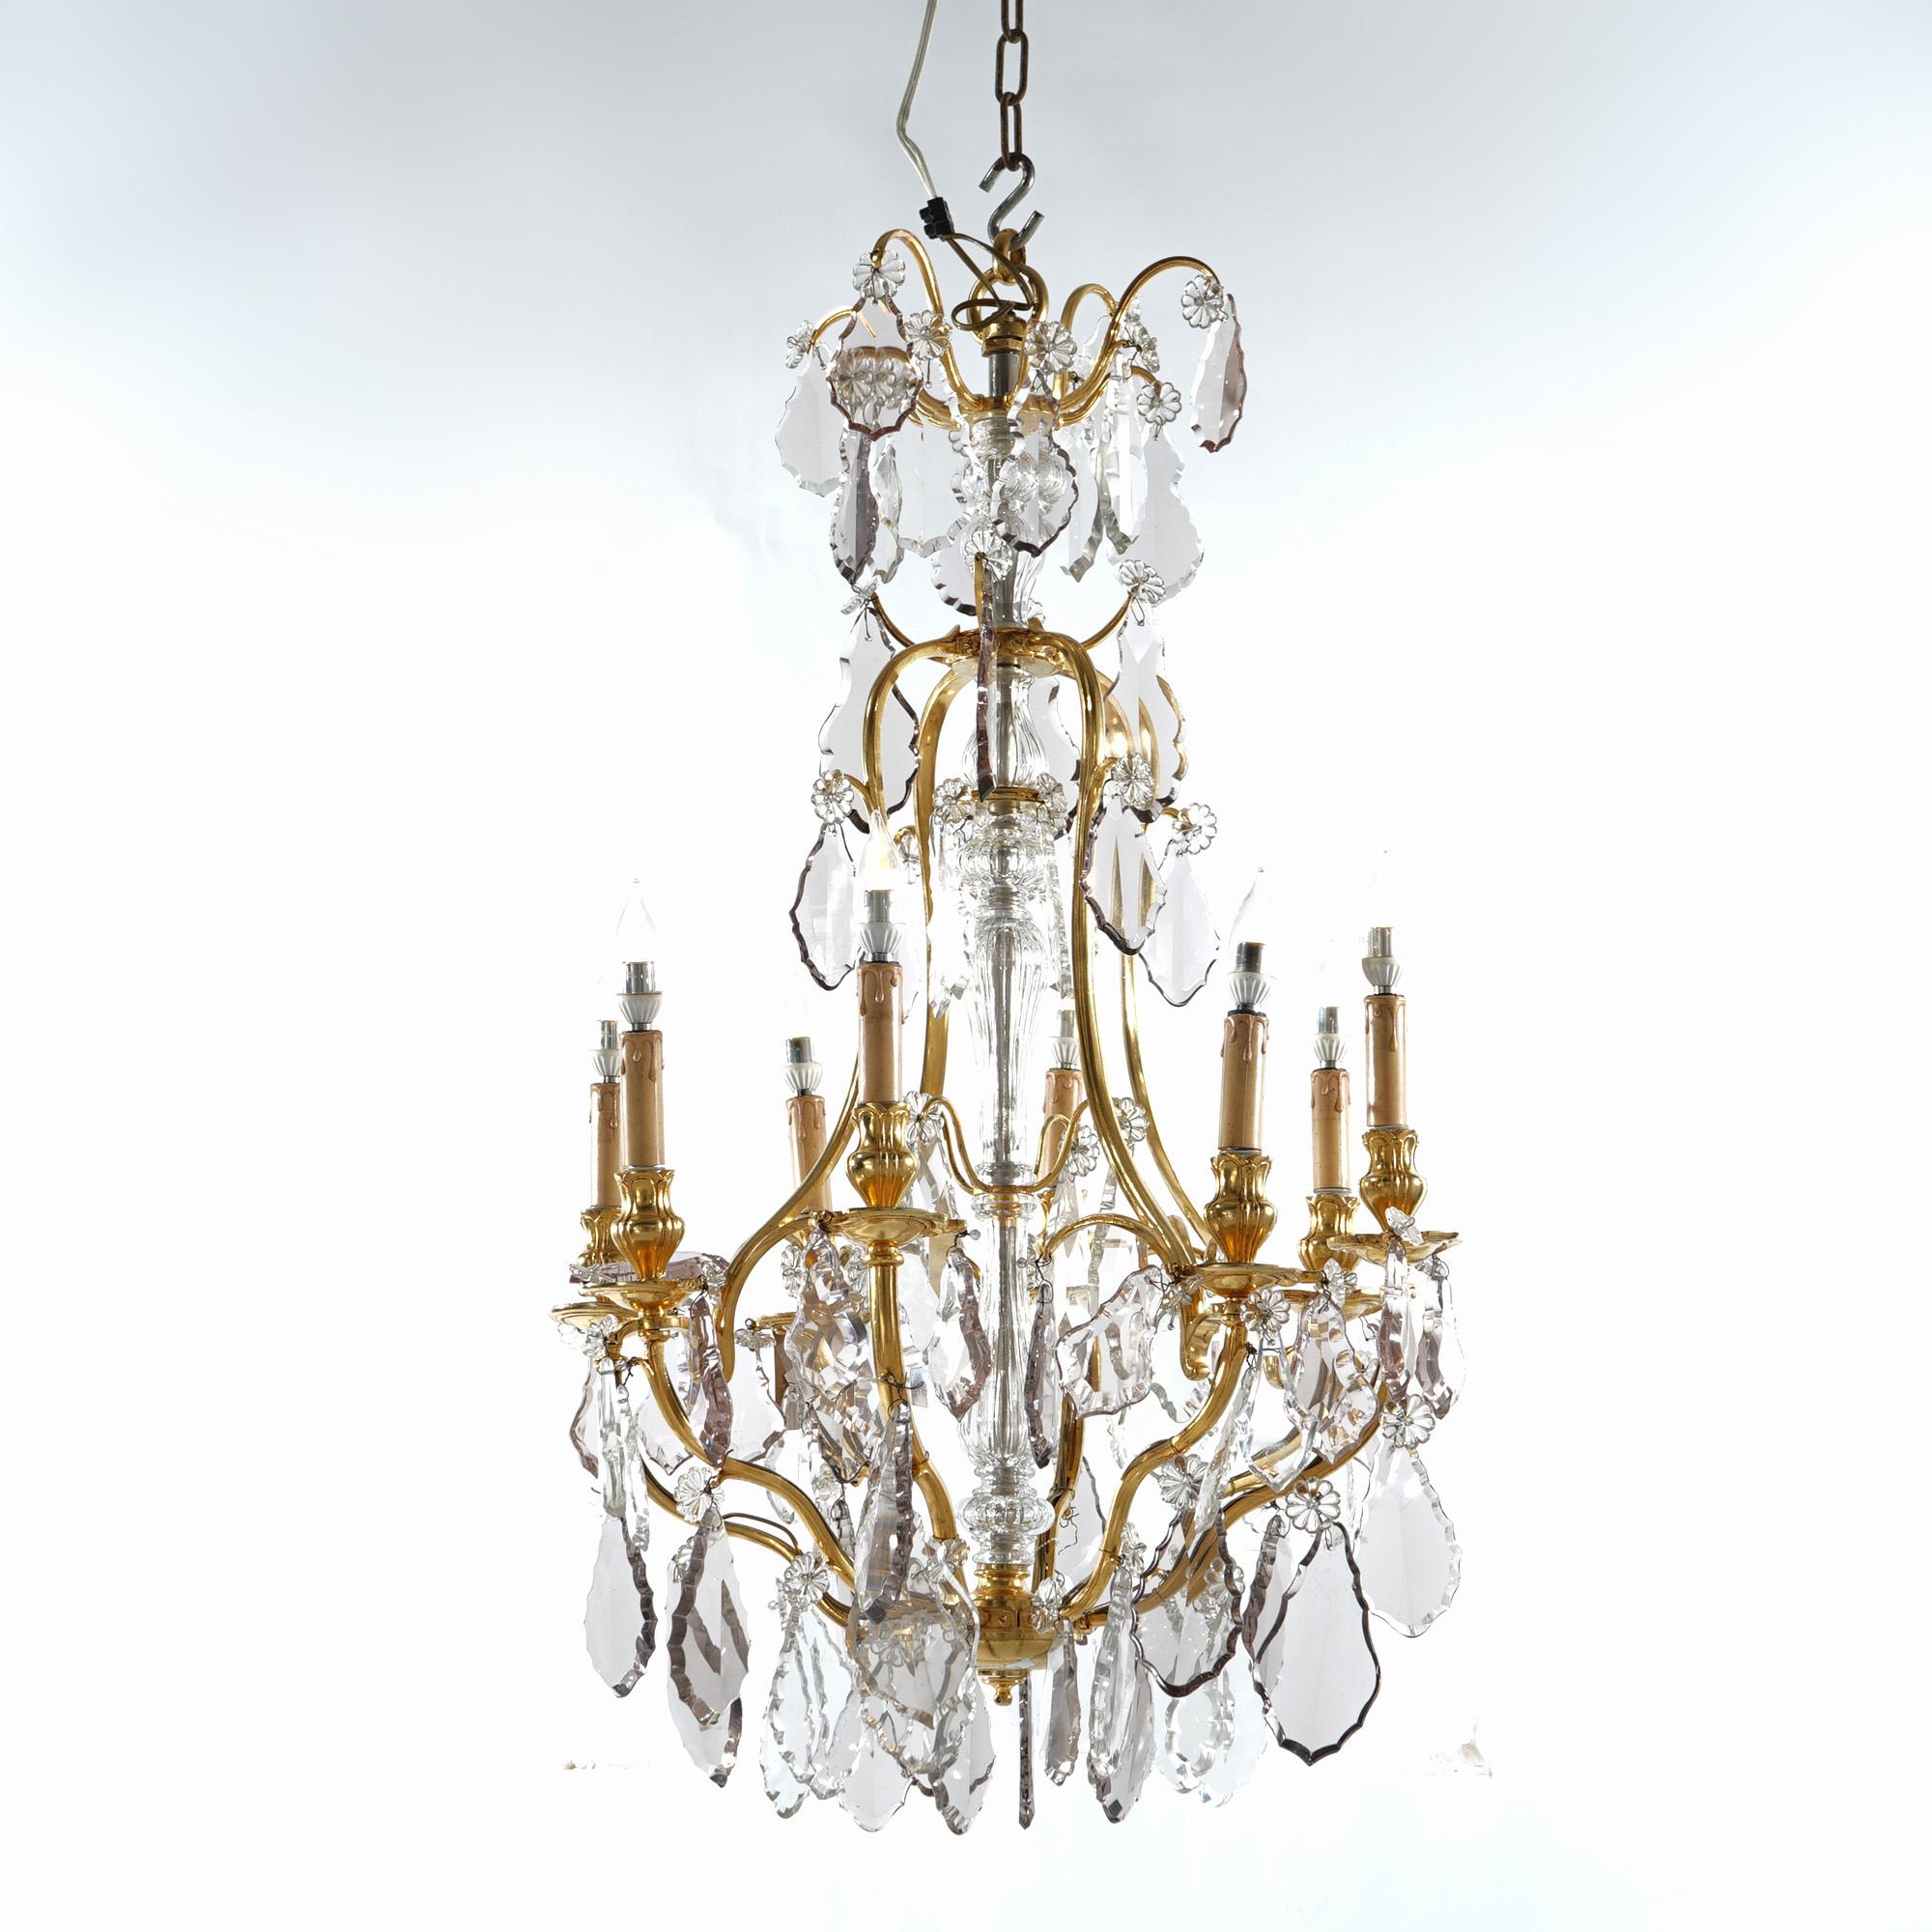 French Louis XIV Style Gilt Bronze & Chrystal 8-Light Chandelier 20th C 2